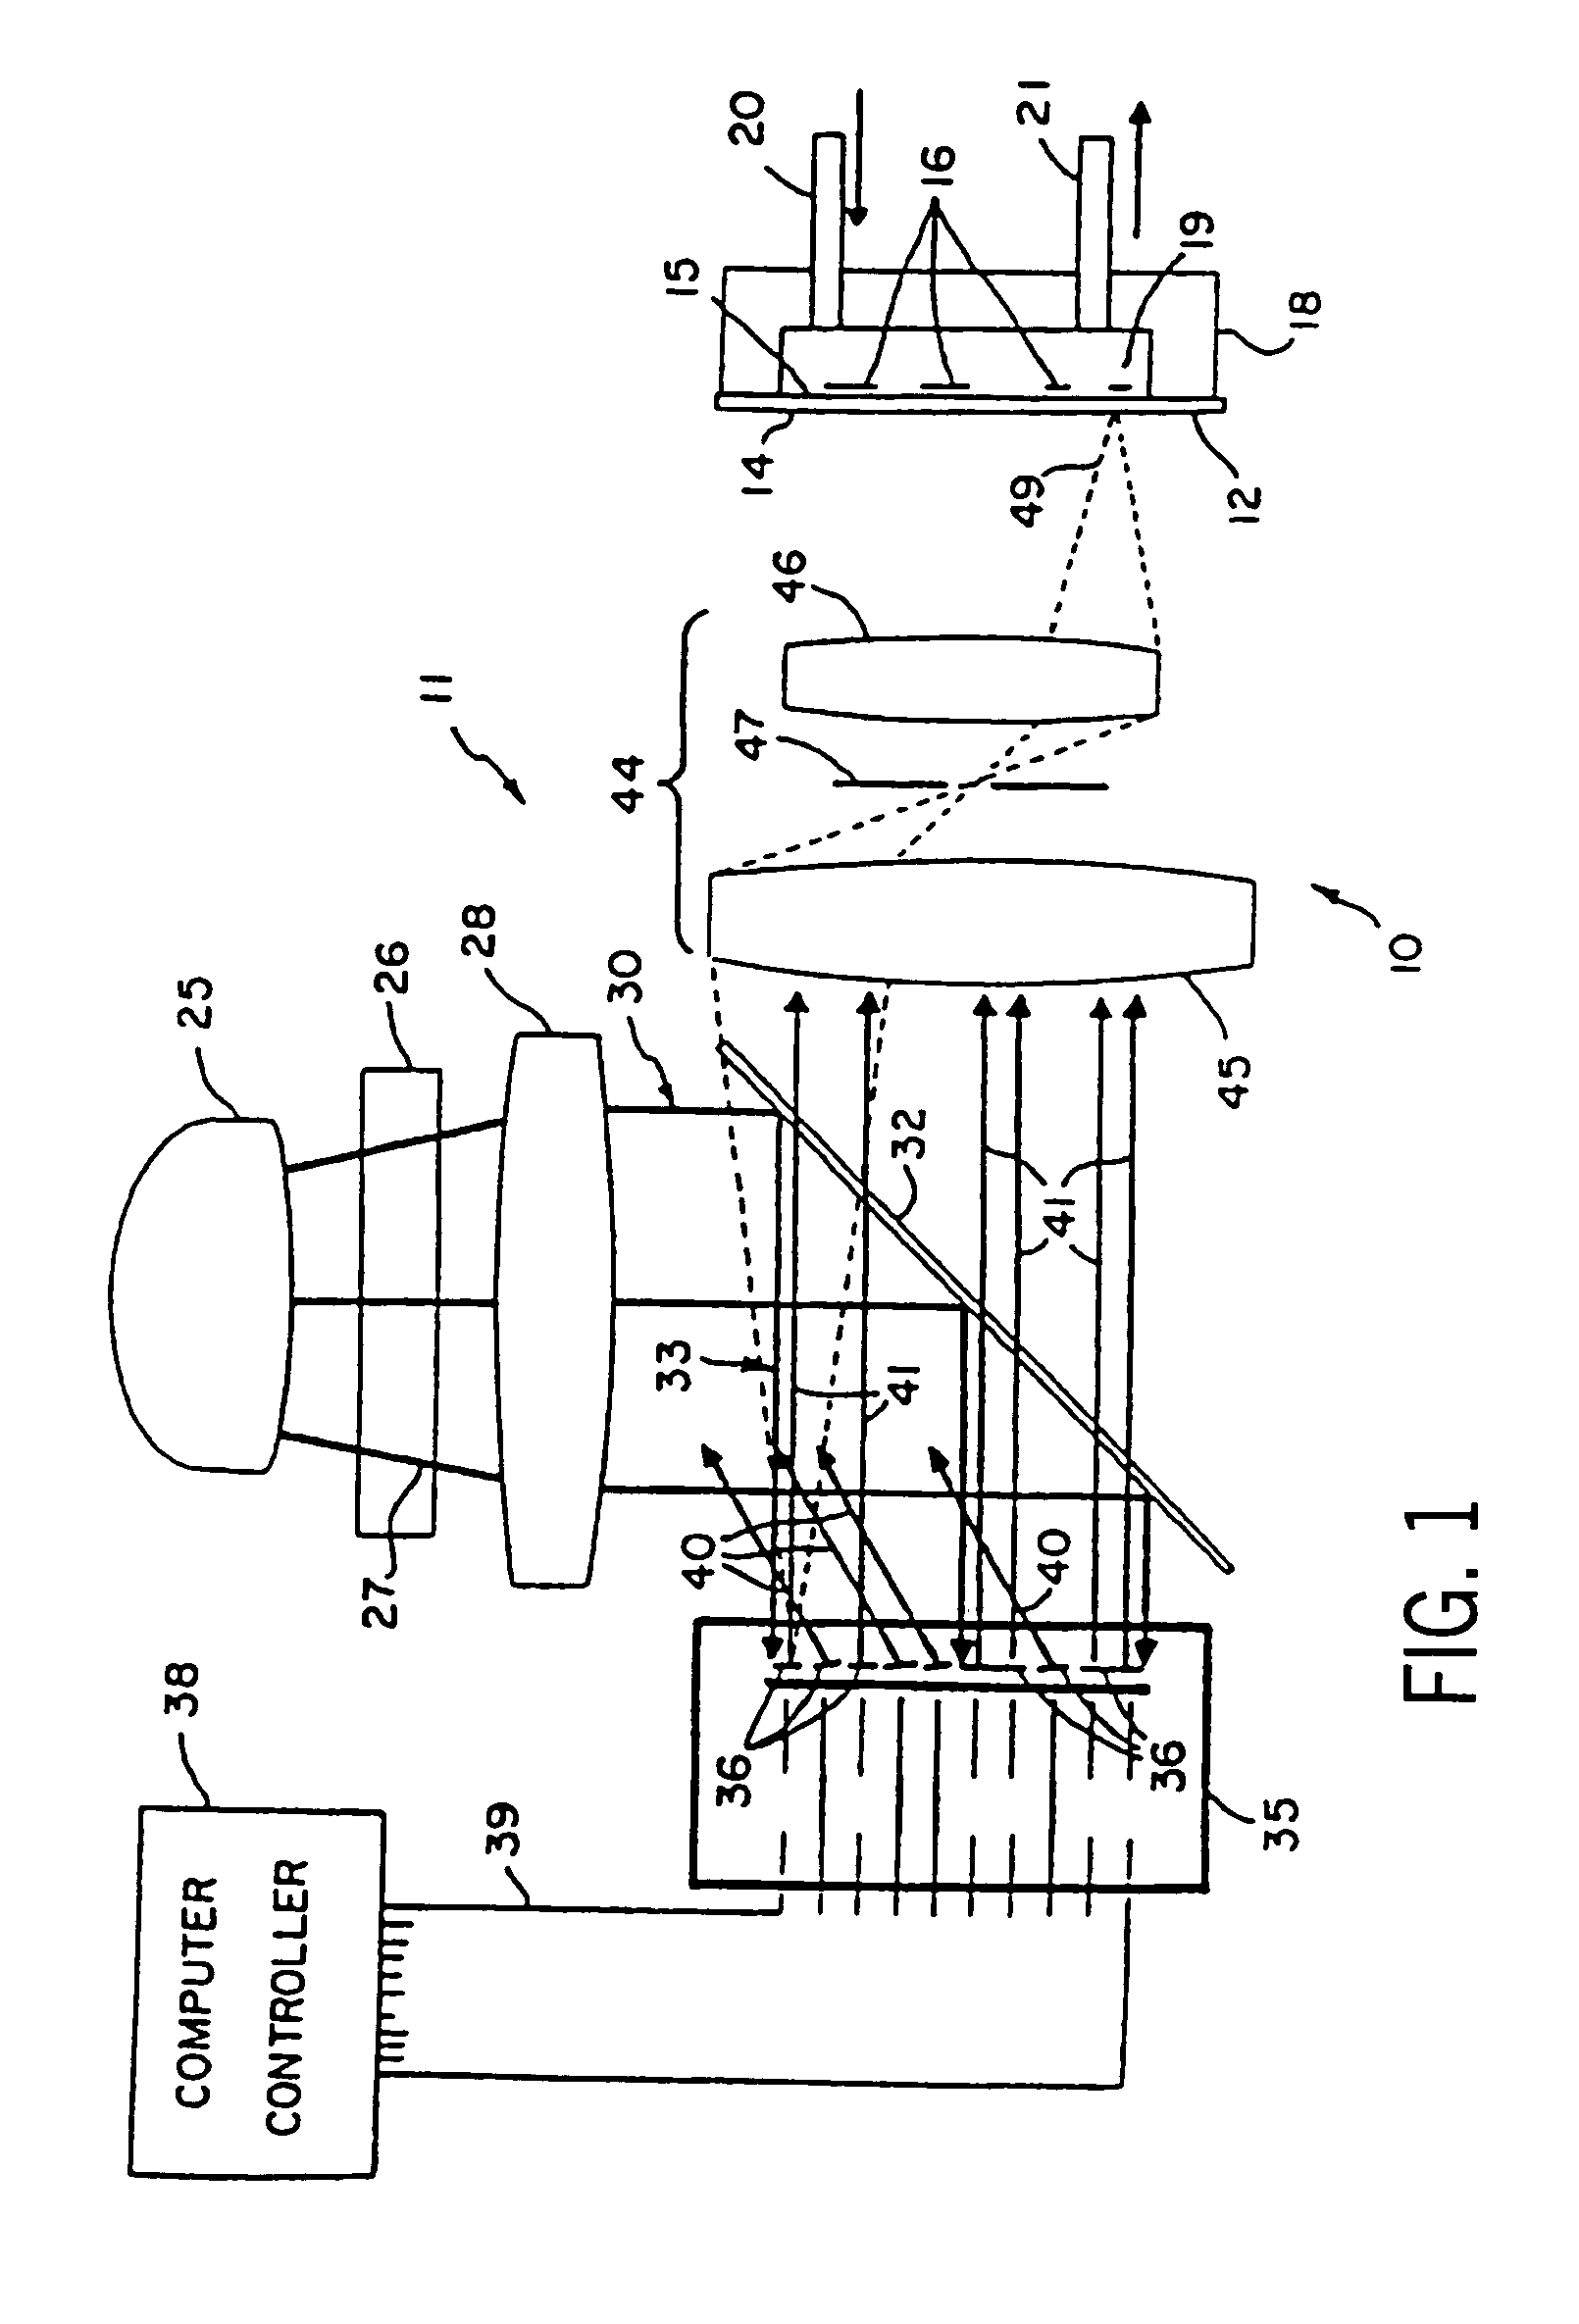 Apparatus for constructing DNA probes having a prismatic and kaleidoscopic light homogenizer